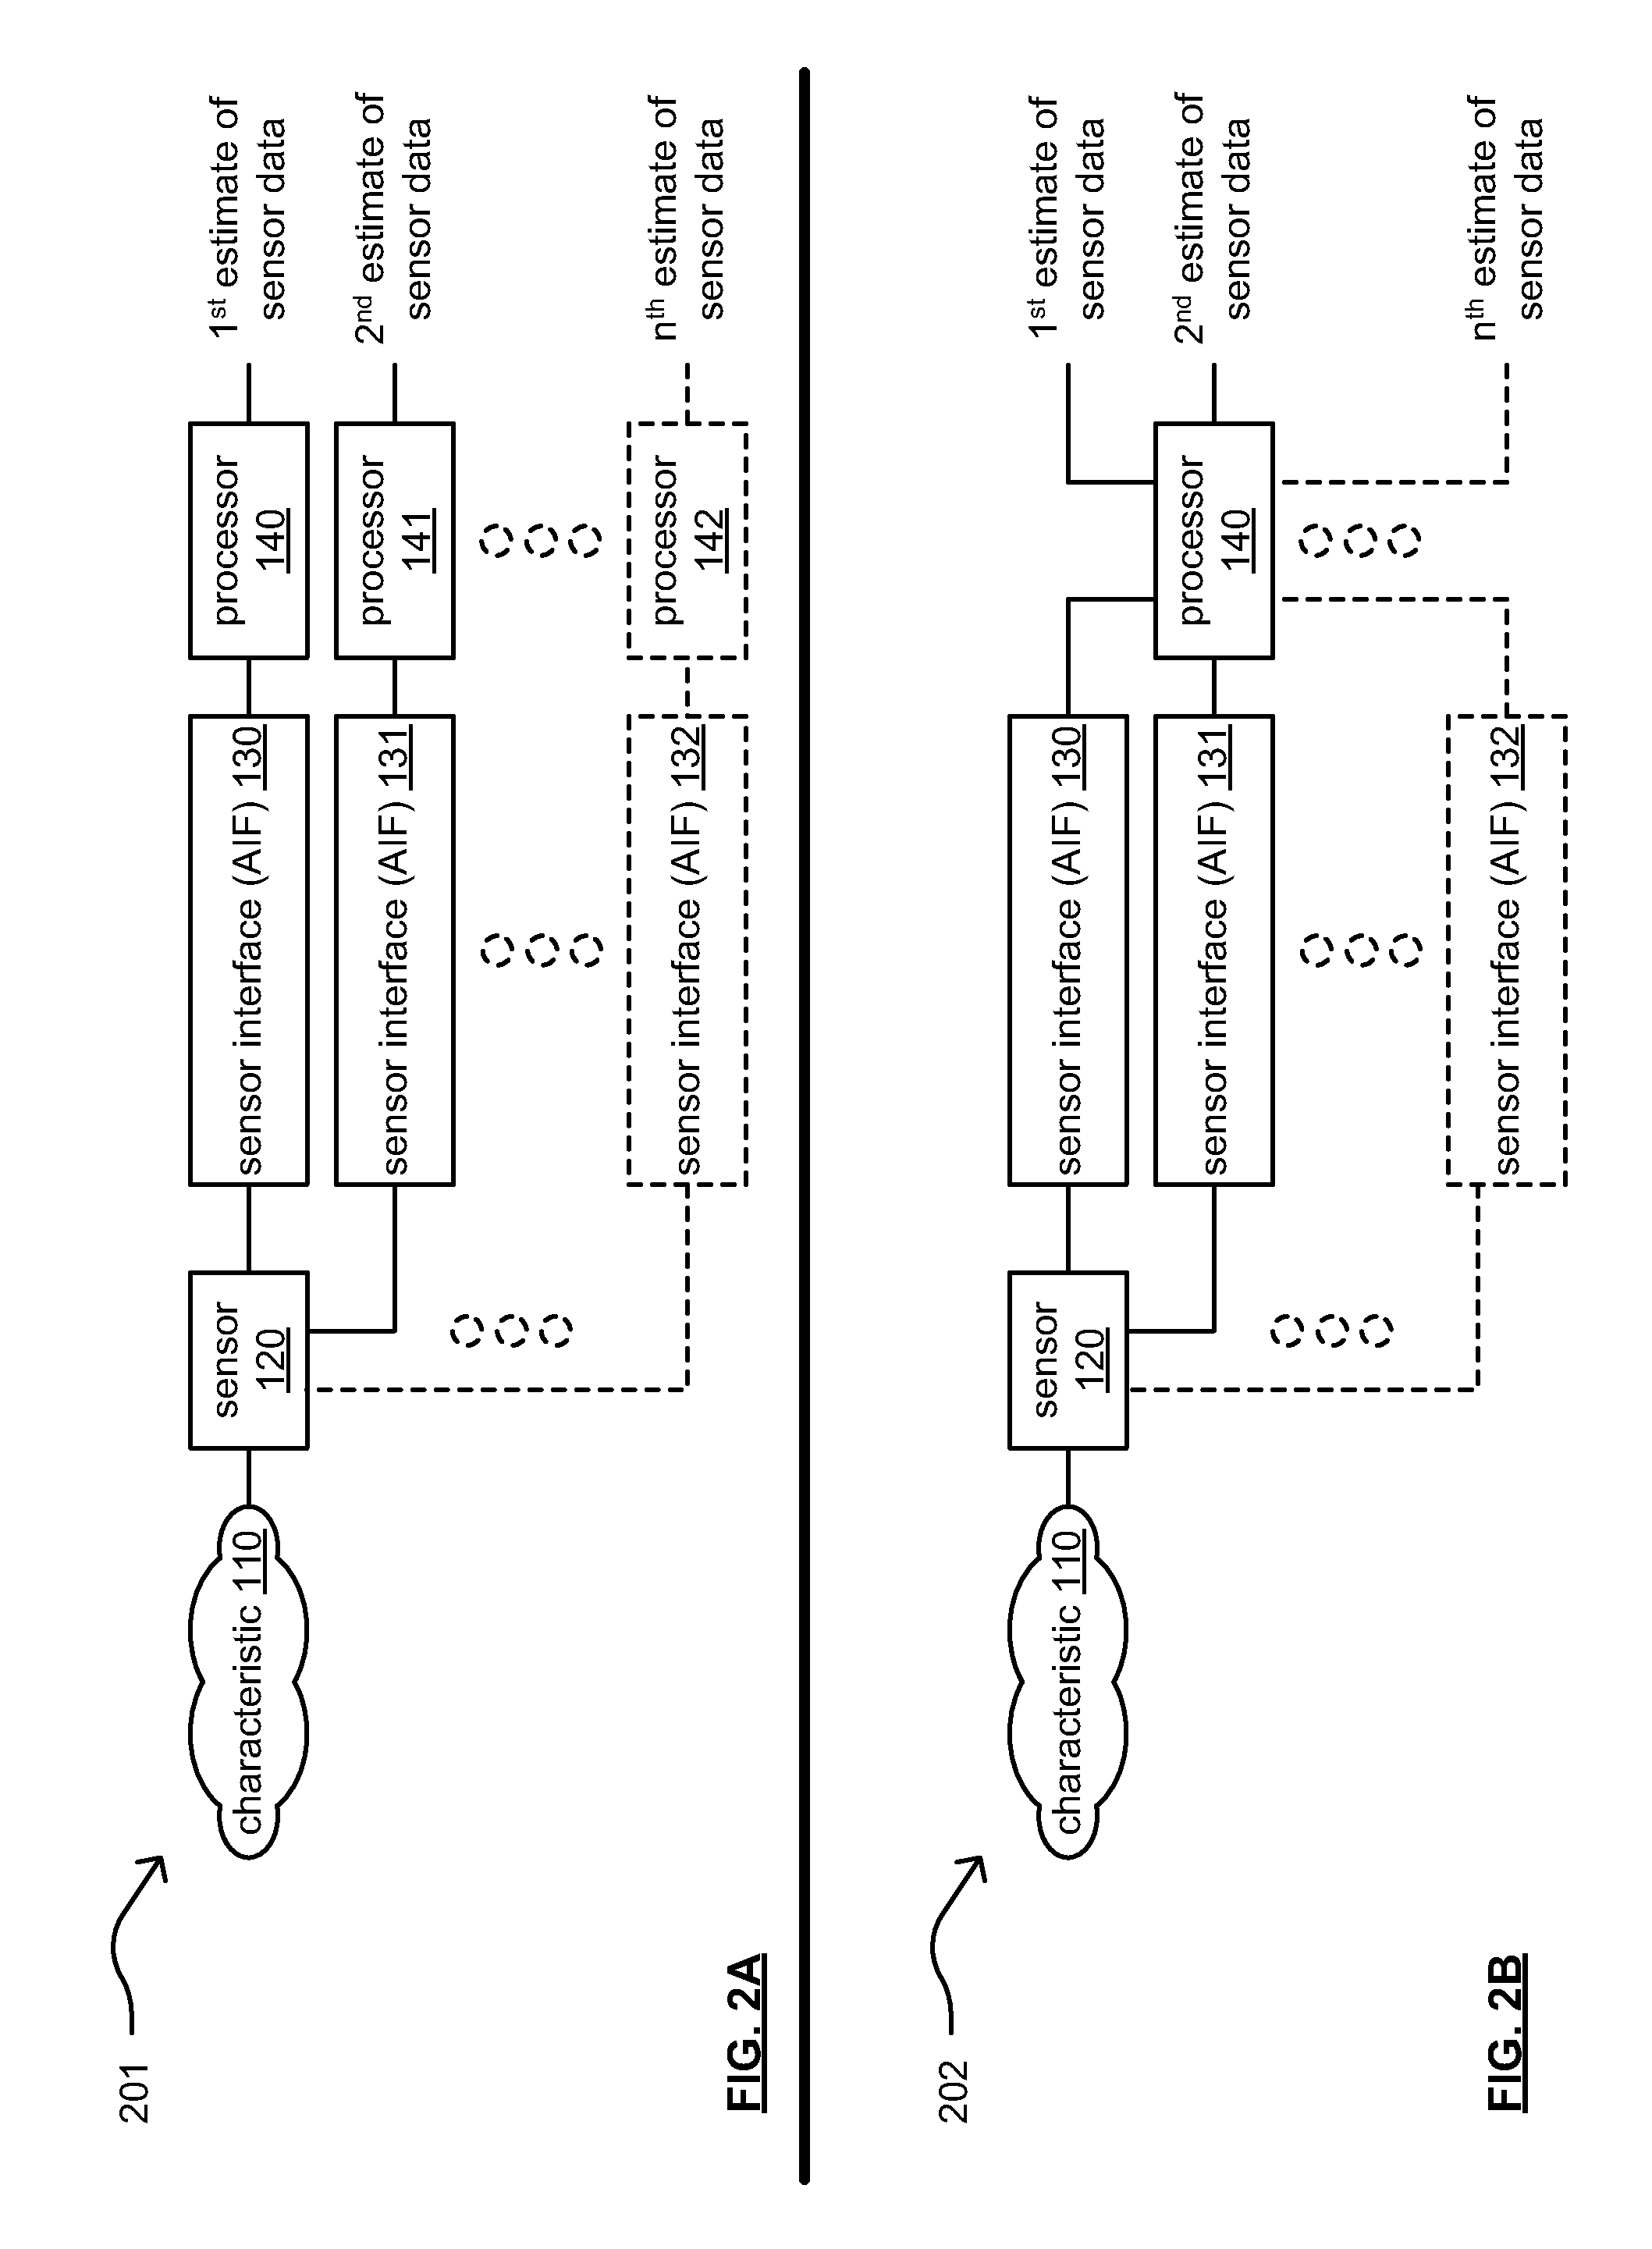 Low-power data acquisition system and sensor interface